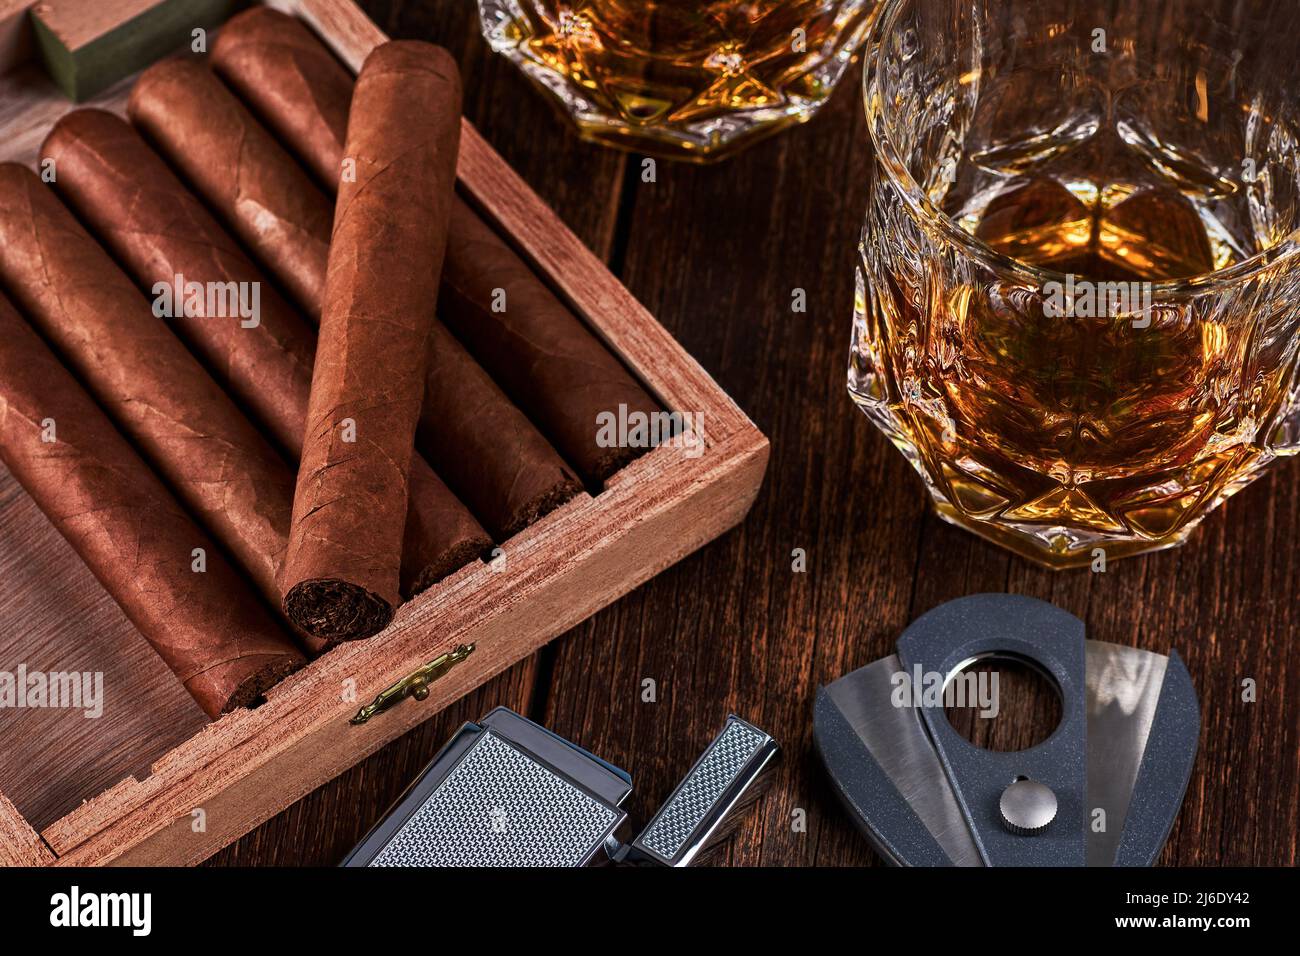 Box with cuban cigars, lighter and cutter on old wooden table top. Two glasses of whiskey or alcohol on the background. Stock Photo